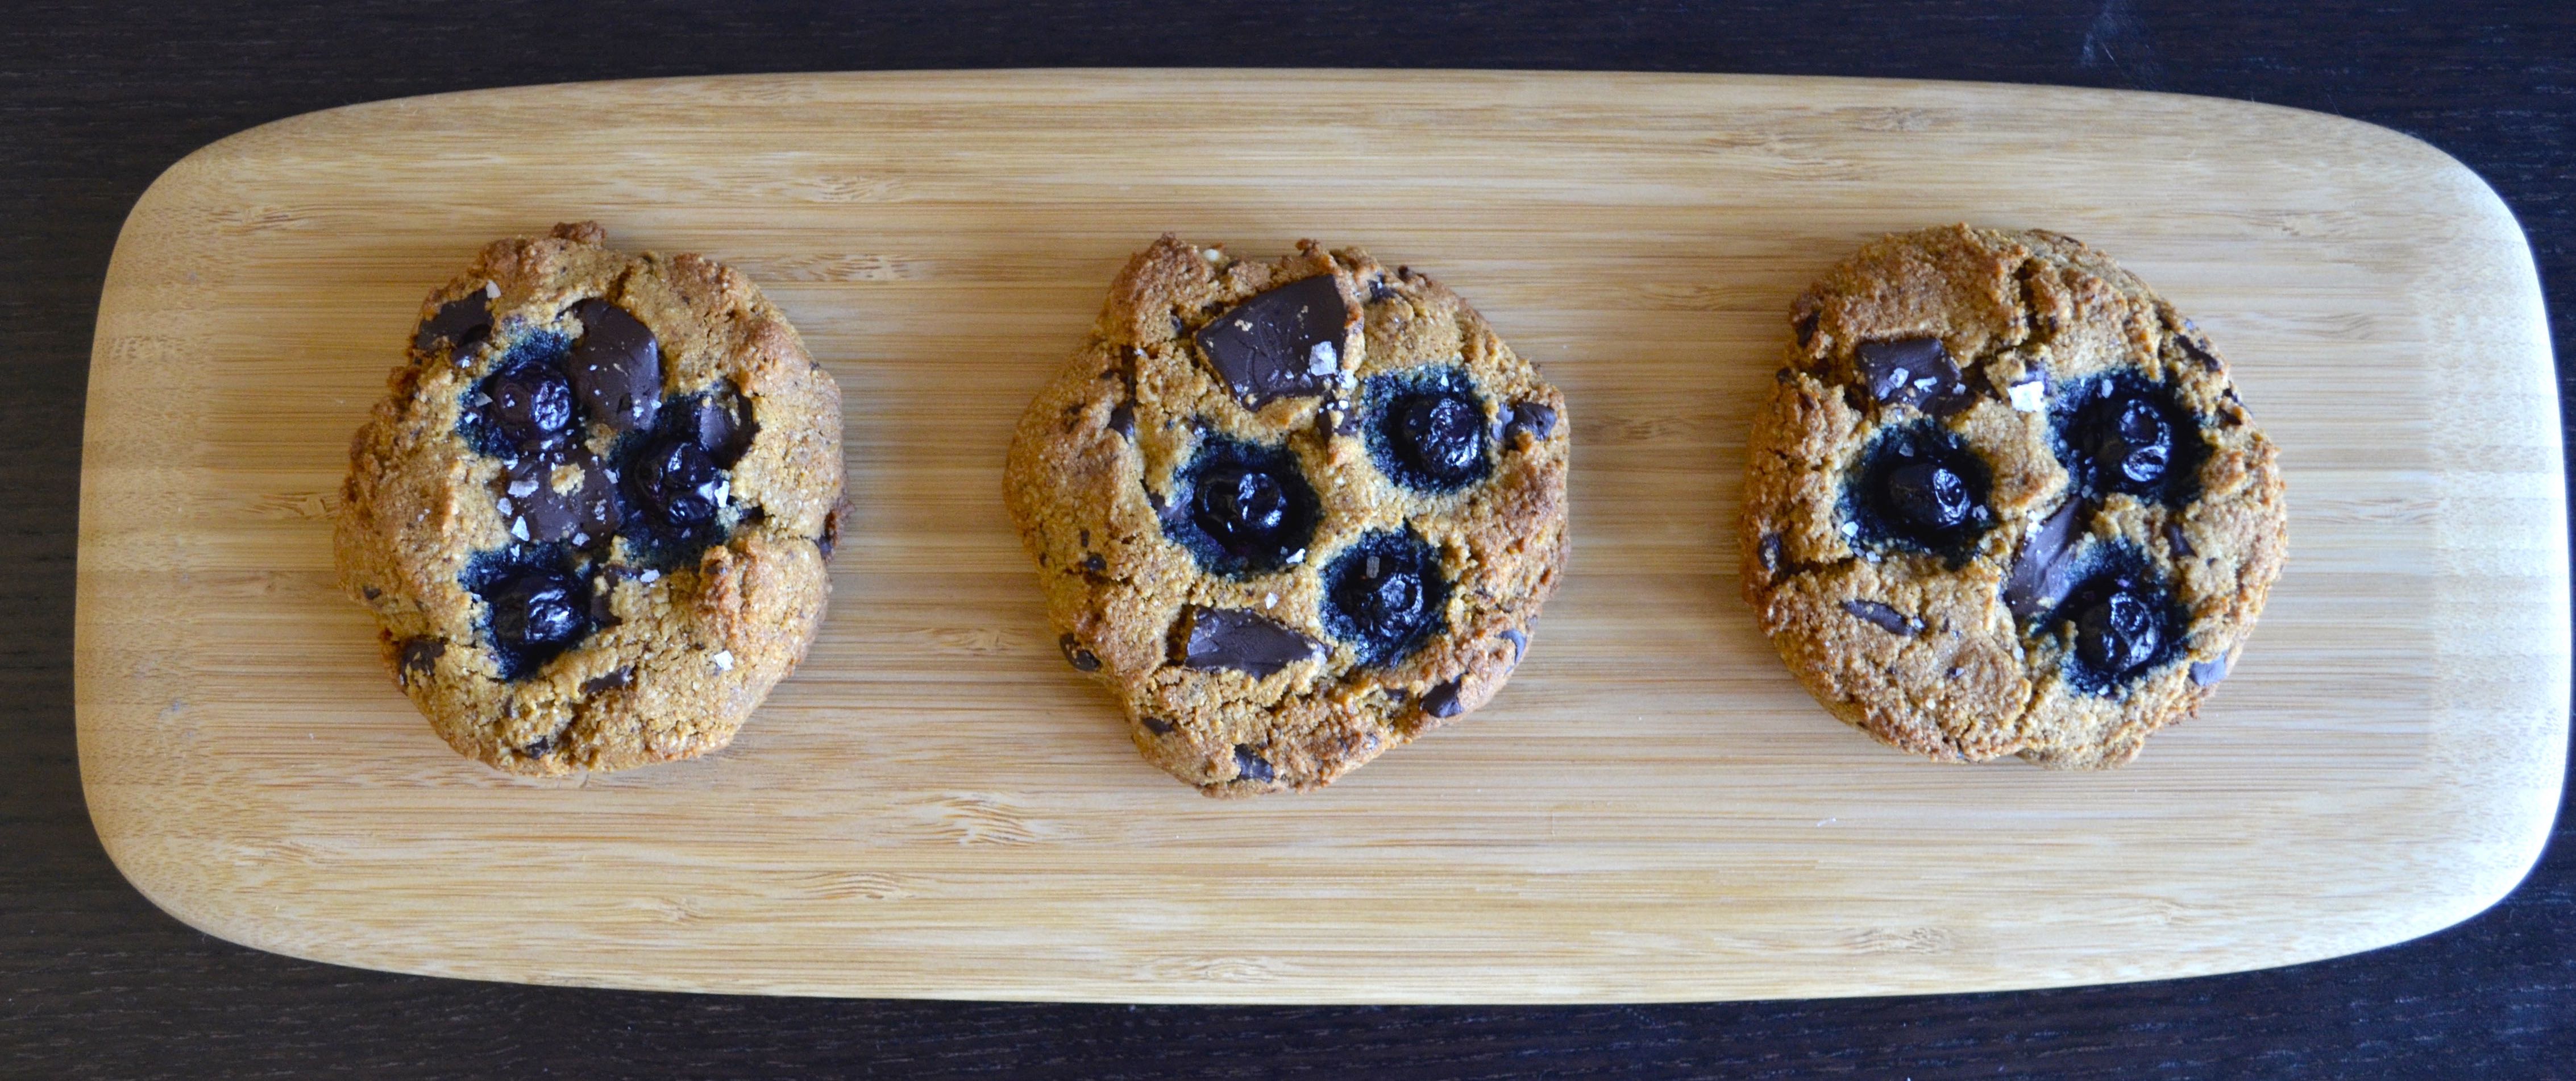 Healthy Chocolate Blueberry Cookies